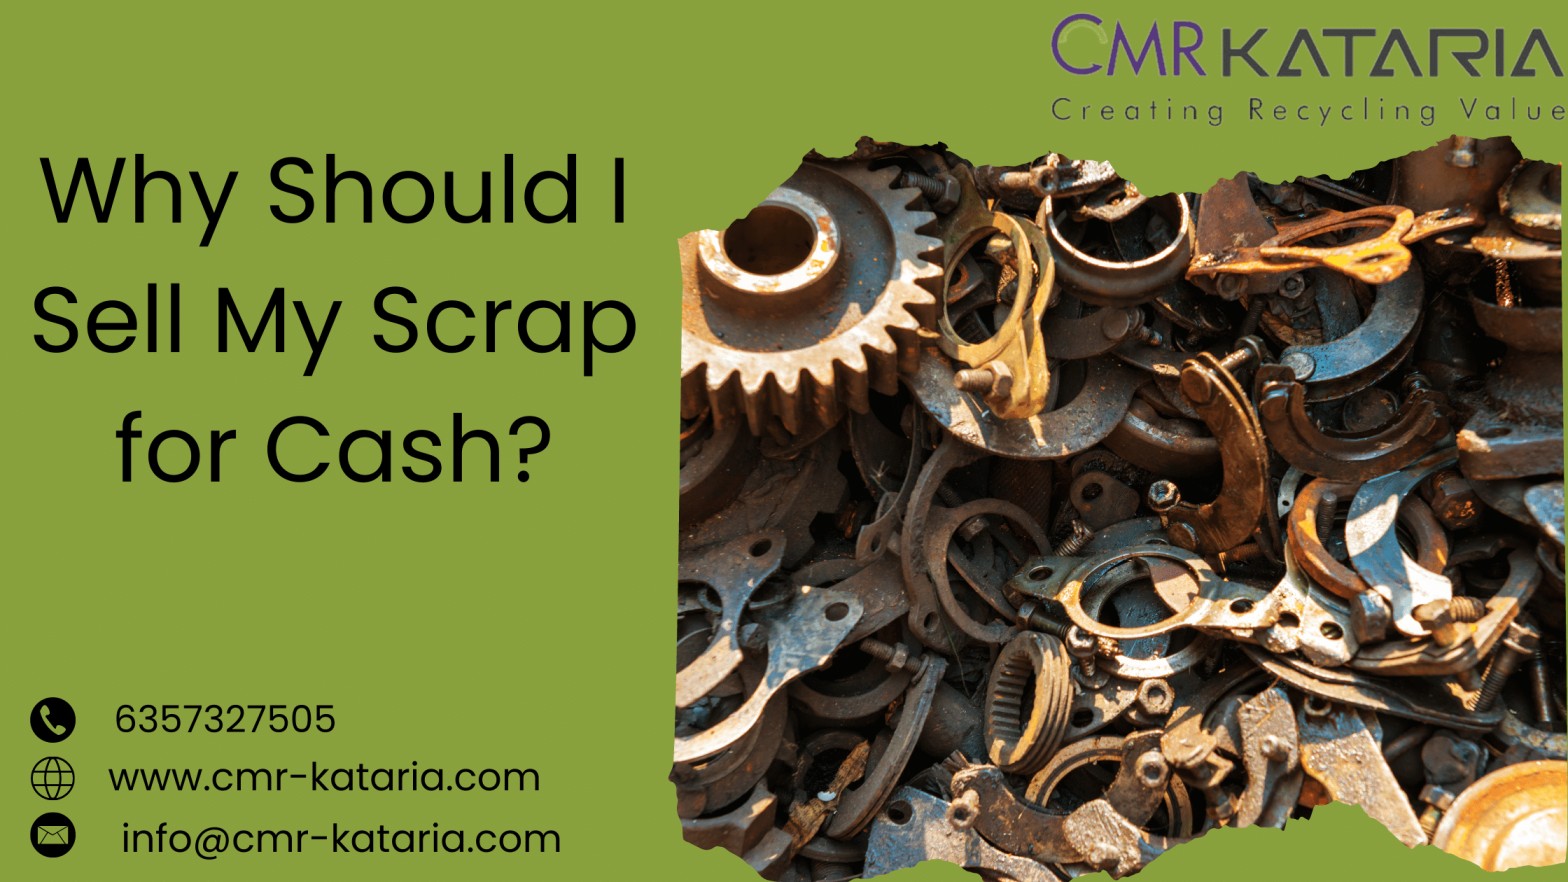 Why Should I Sell My Scrap for Cash?